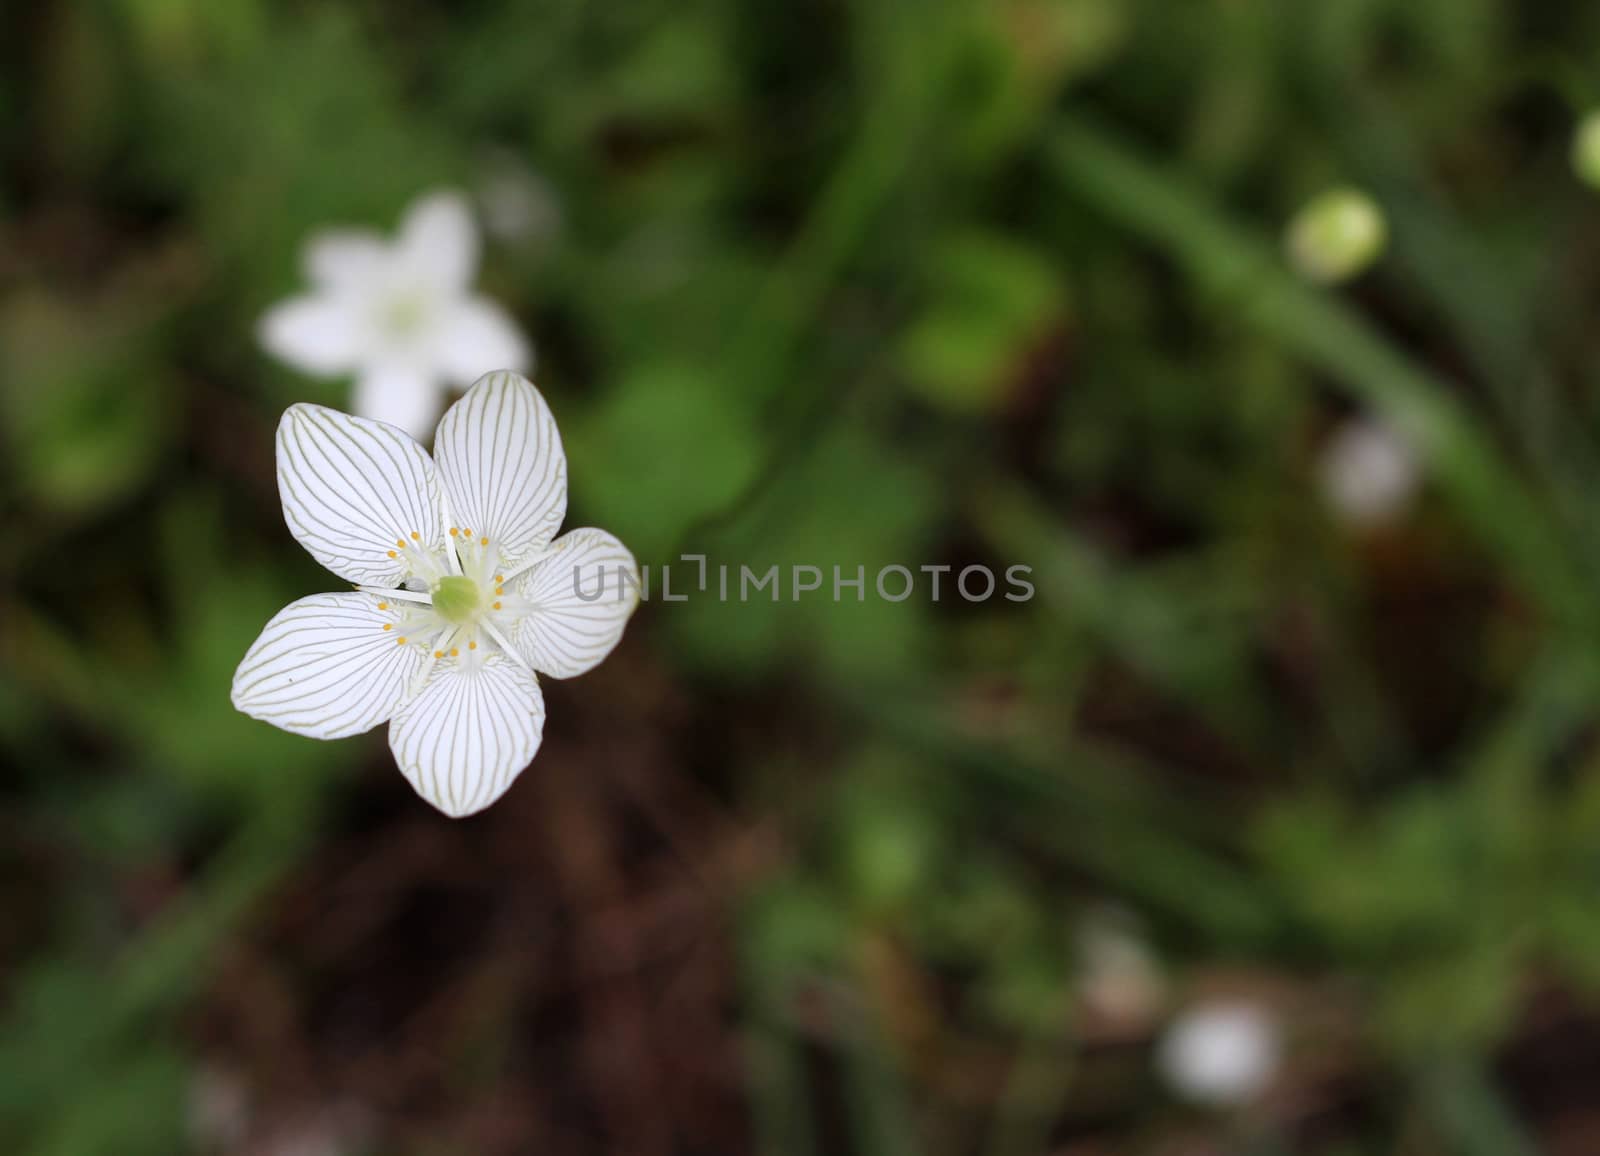 Grass-of-Parnassus Flower blooming in early fall